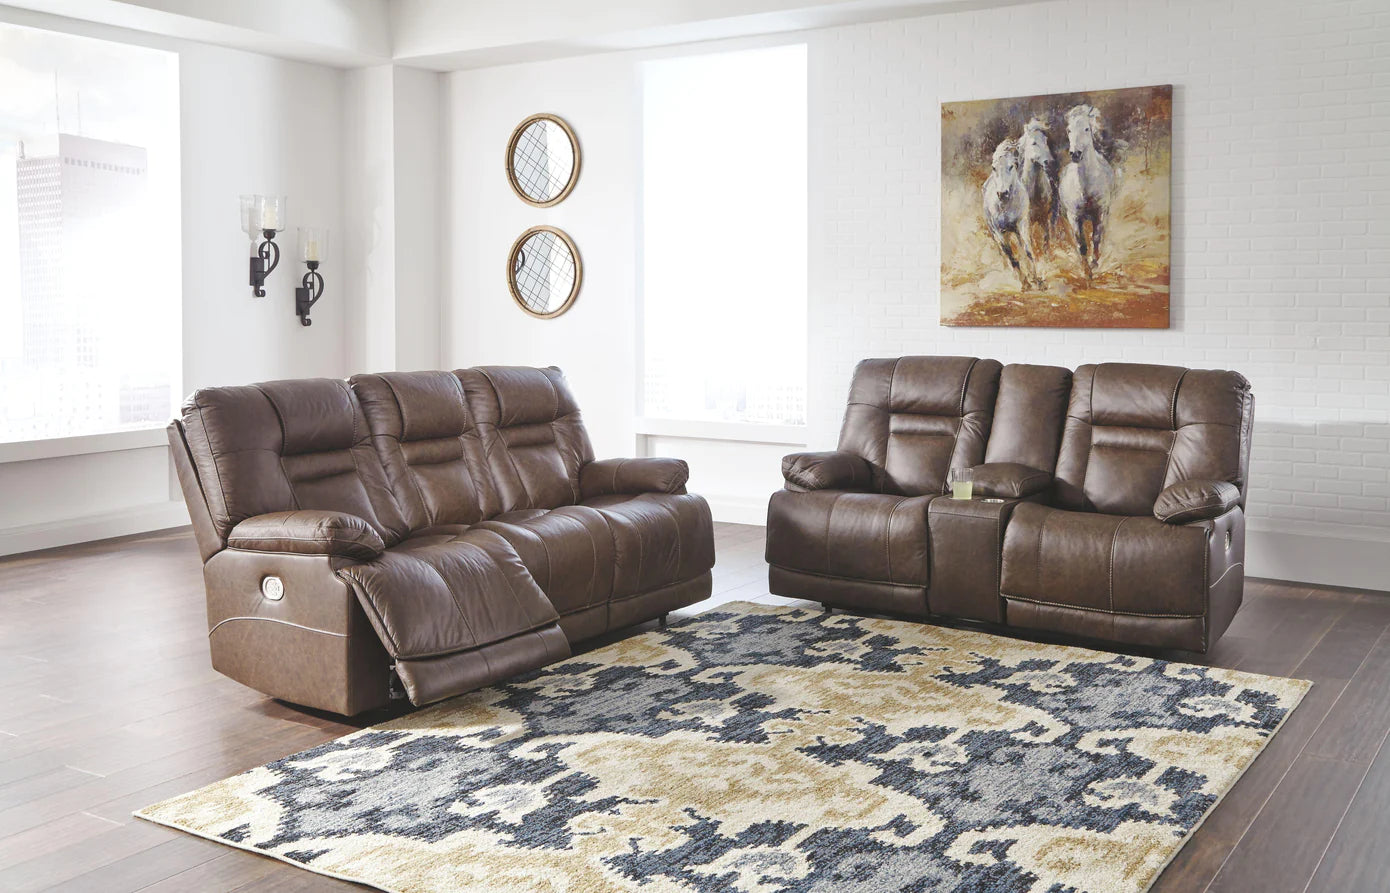 7 Best Reasons to Buy Recliners: The Ultimate Comfort Experience